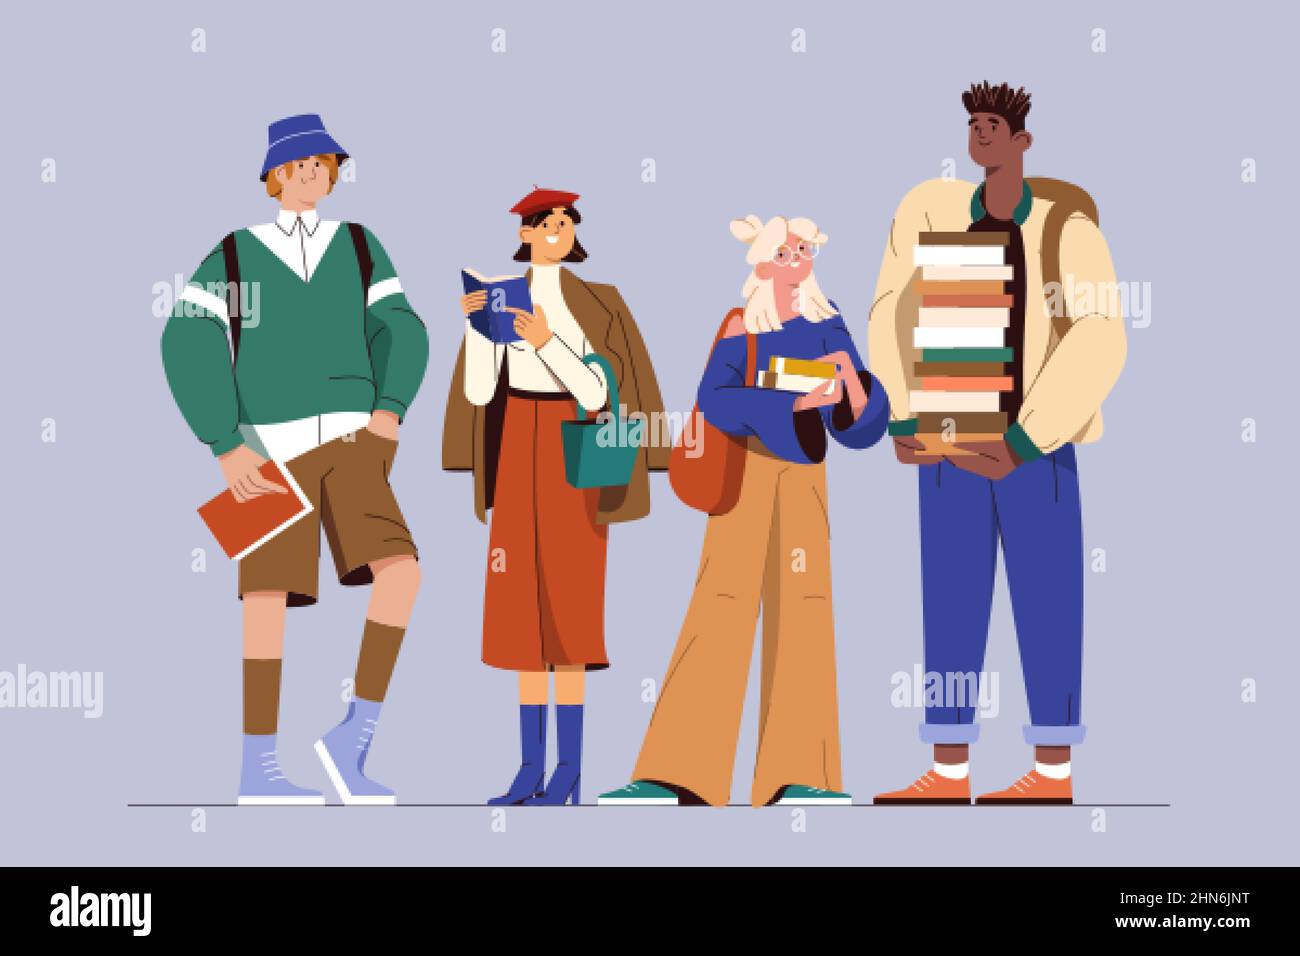 https://c8.alamy.com/comp/2HN6JNT/flat-group-of-young-smiling-college-or-university-students-with-books-and-backpacks-standing-together-diverse-teenagers-in-modern-clothes-happy-multicultural-people-cheerful-teen-girls-and-guys-2HN6JNT.jpg